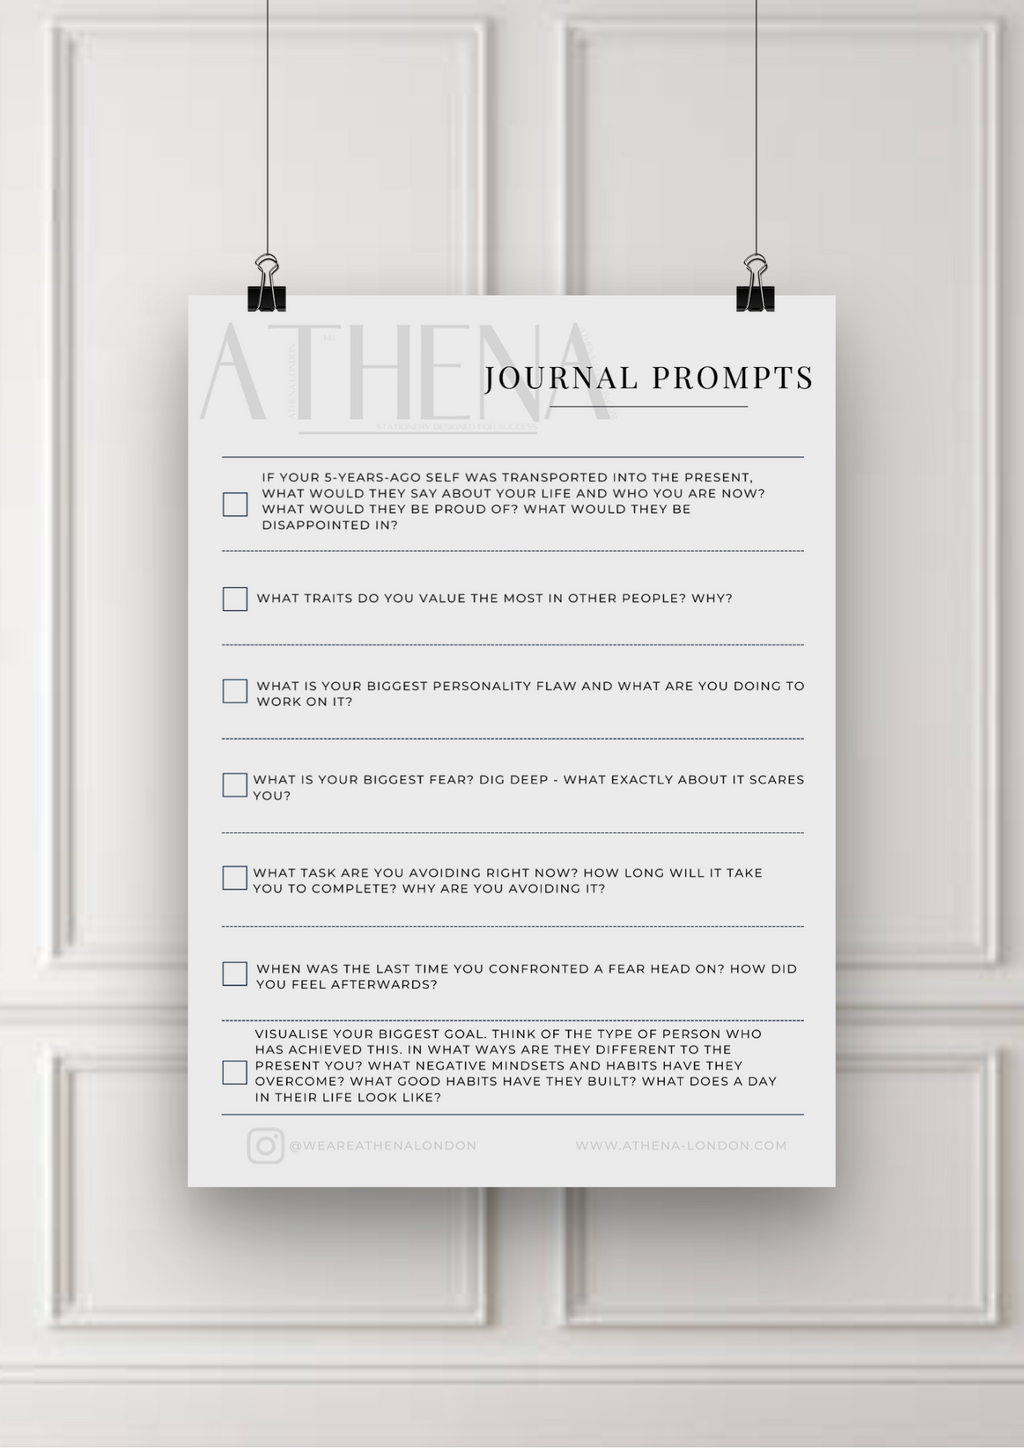 34 Journal Prompts for Personal Growth | 34 Inspiring Journal Prompts